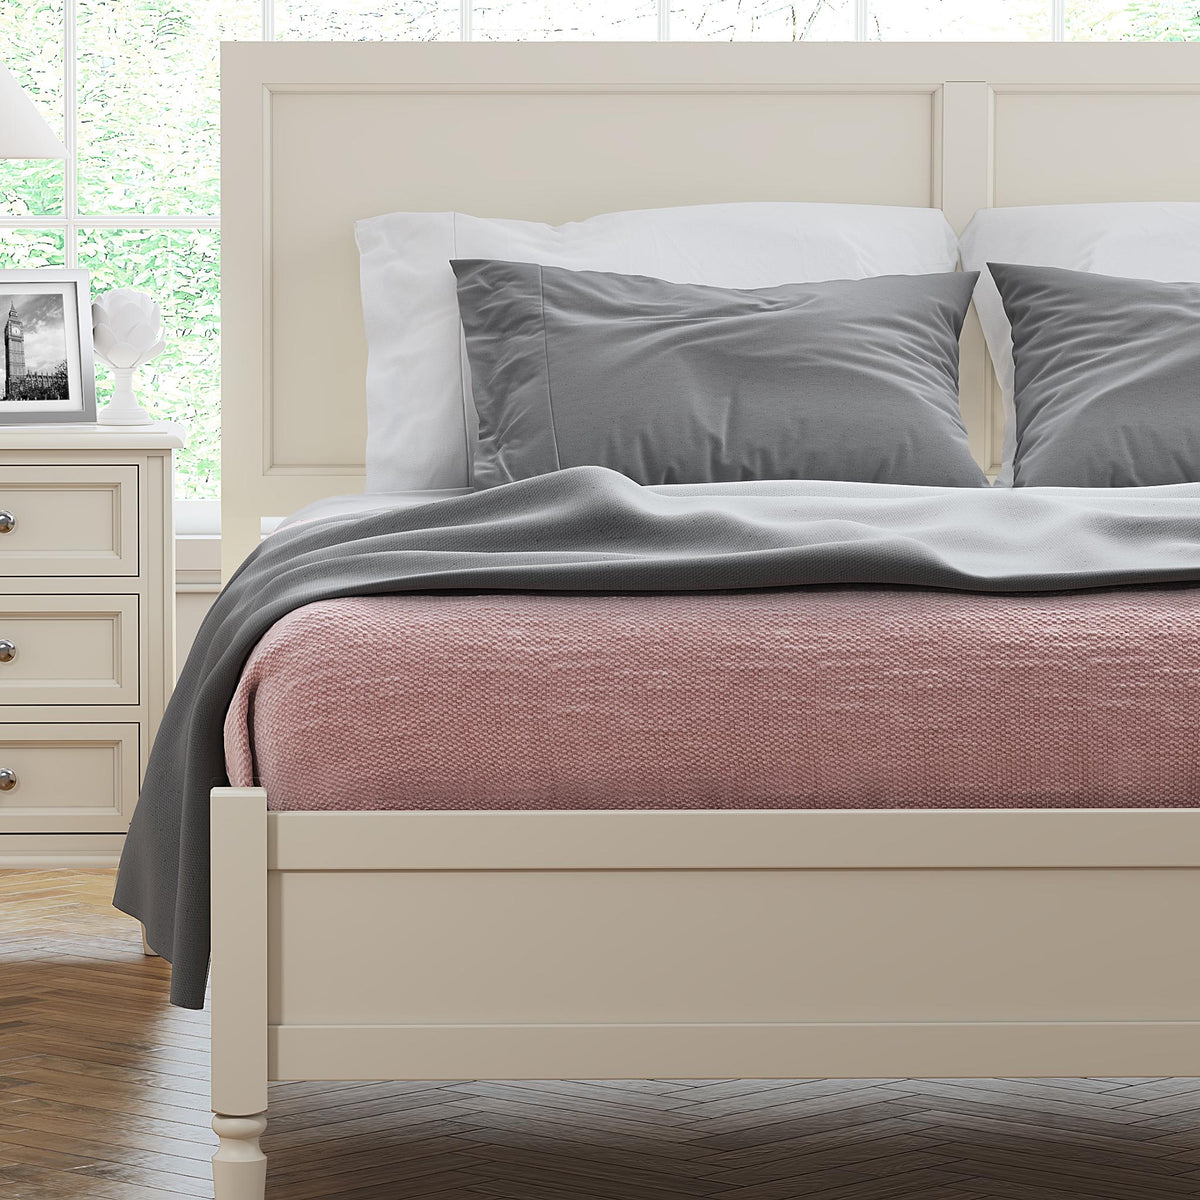 The Muslanne Cream 4'6" Double Bed Frame - Lifestyle Close Up 